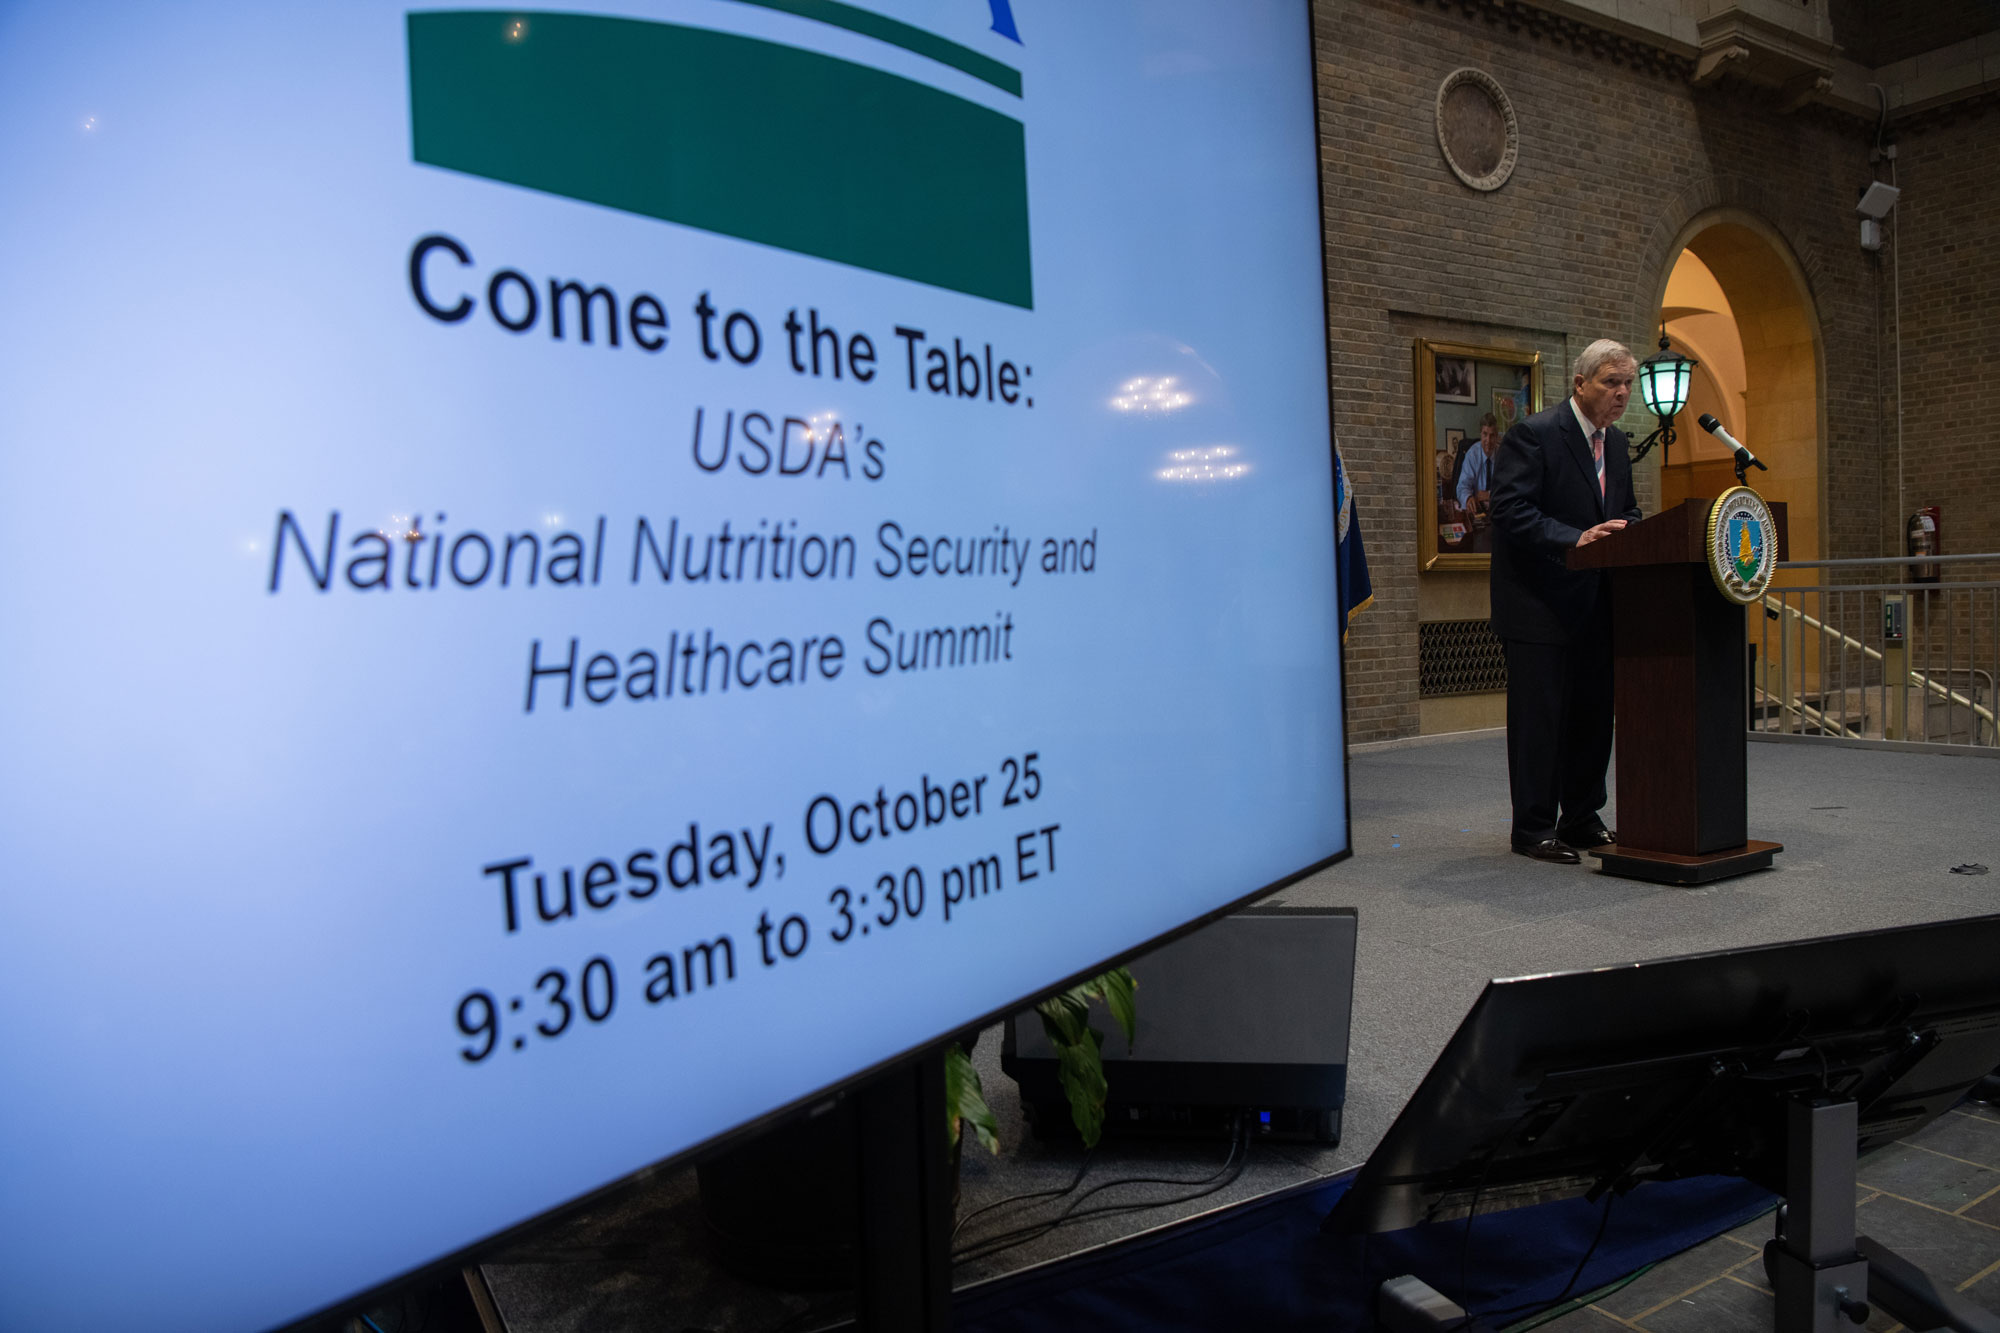 Agriculture Secretary Tom Vilsack kicks off USDA’s National Nutrition Security and Healthcare Summit